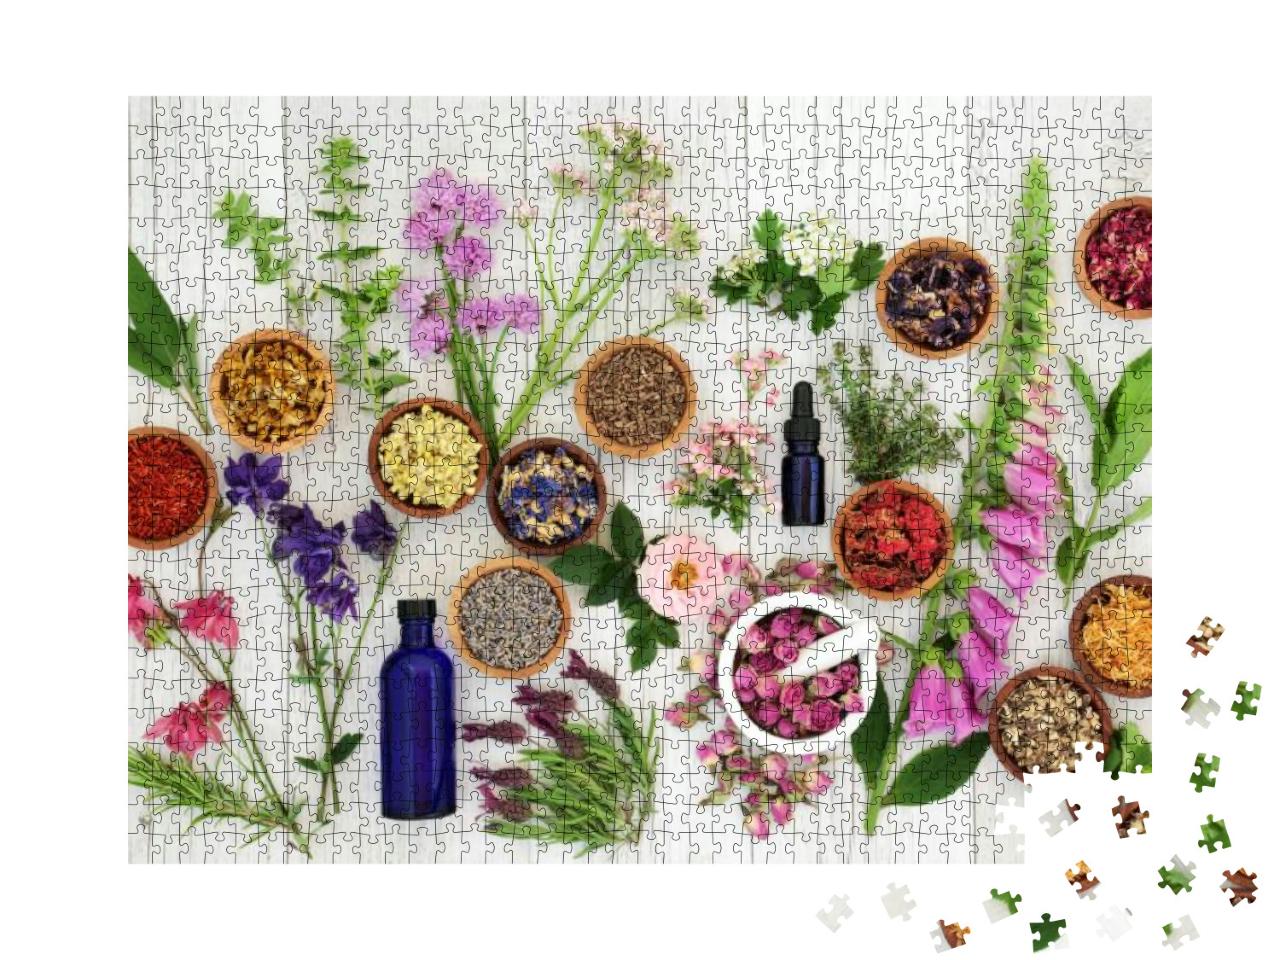 Natural Herbal Medicine Selection with Herbs & Flowers in... Jigsaw Puzzle with 1000 pieces